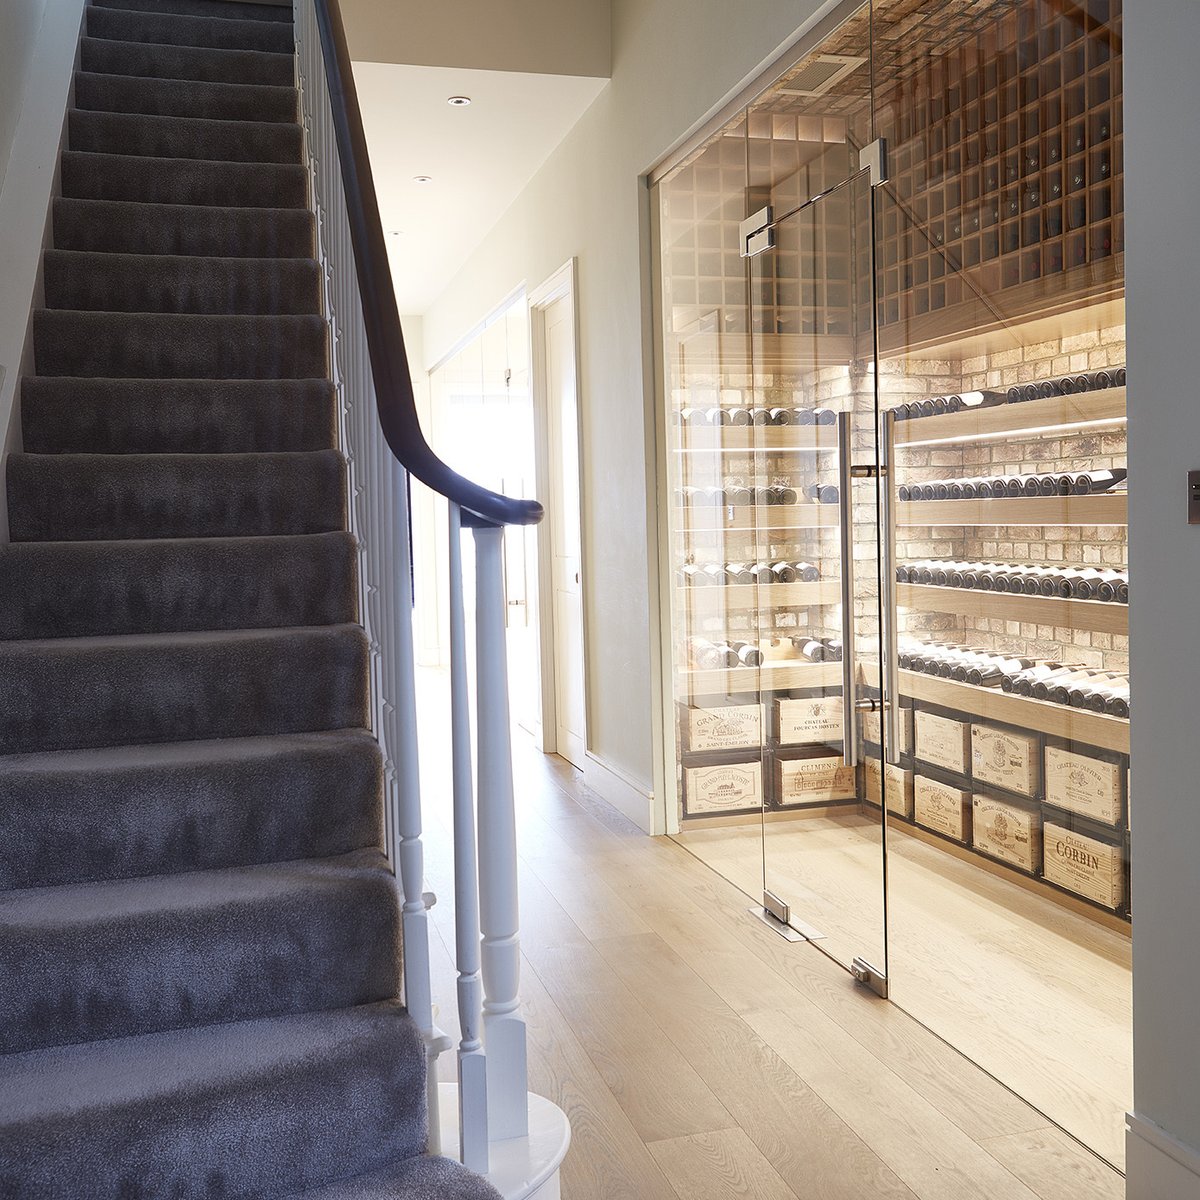 Customers generally want their wine cellar to highlight their wine collection, not the equipment. A great solution for that are the ducted systems from @WineGuardian

instagram.com/p/CMzxcZ4rU8O/

#winecellar #winecellarcooling #wineguardian #wine #winecellardesign #winelover #wine